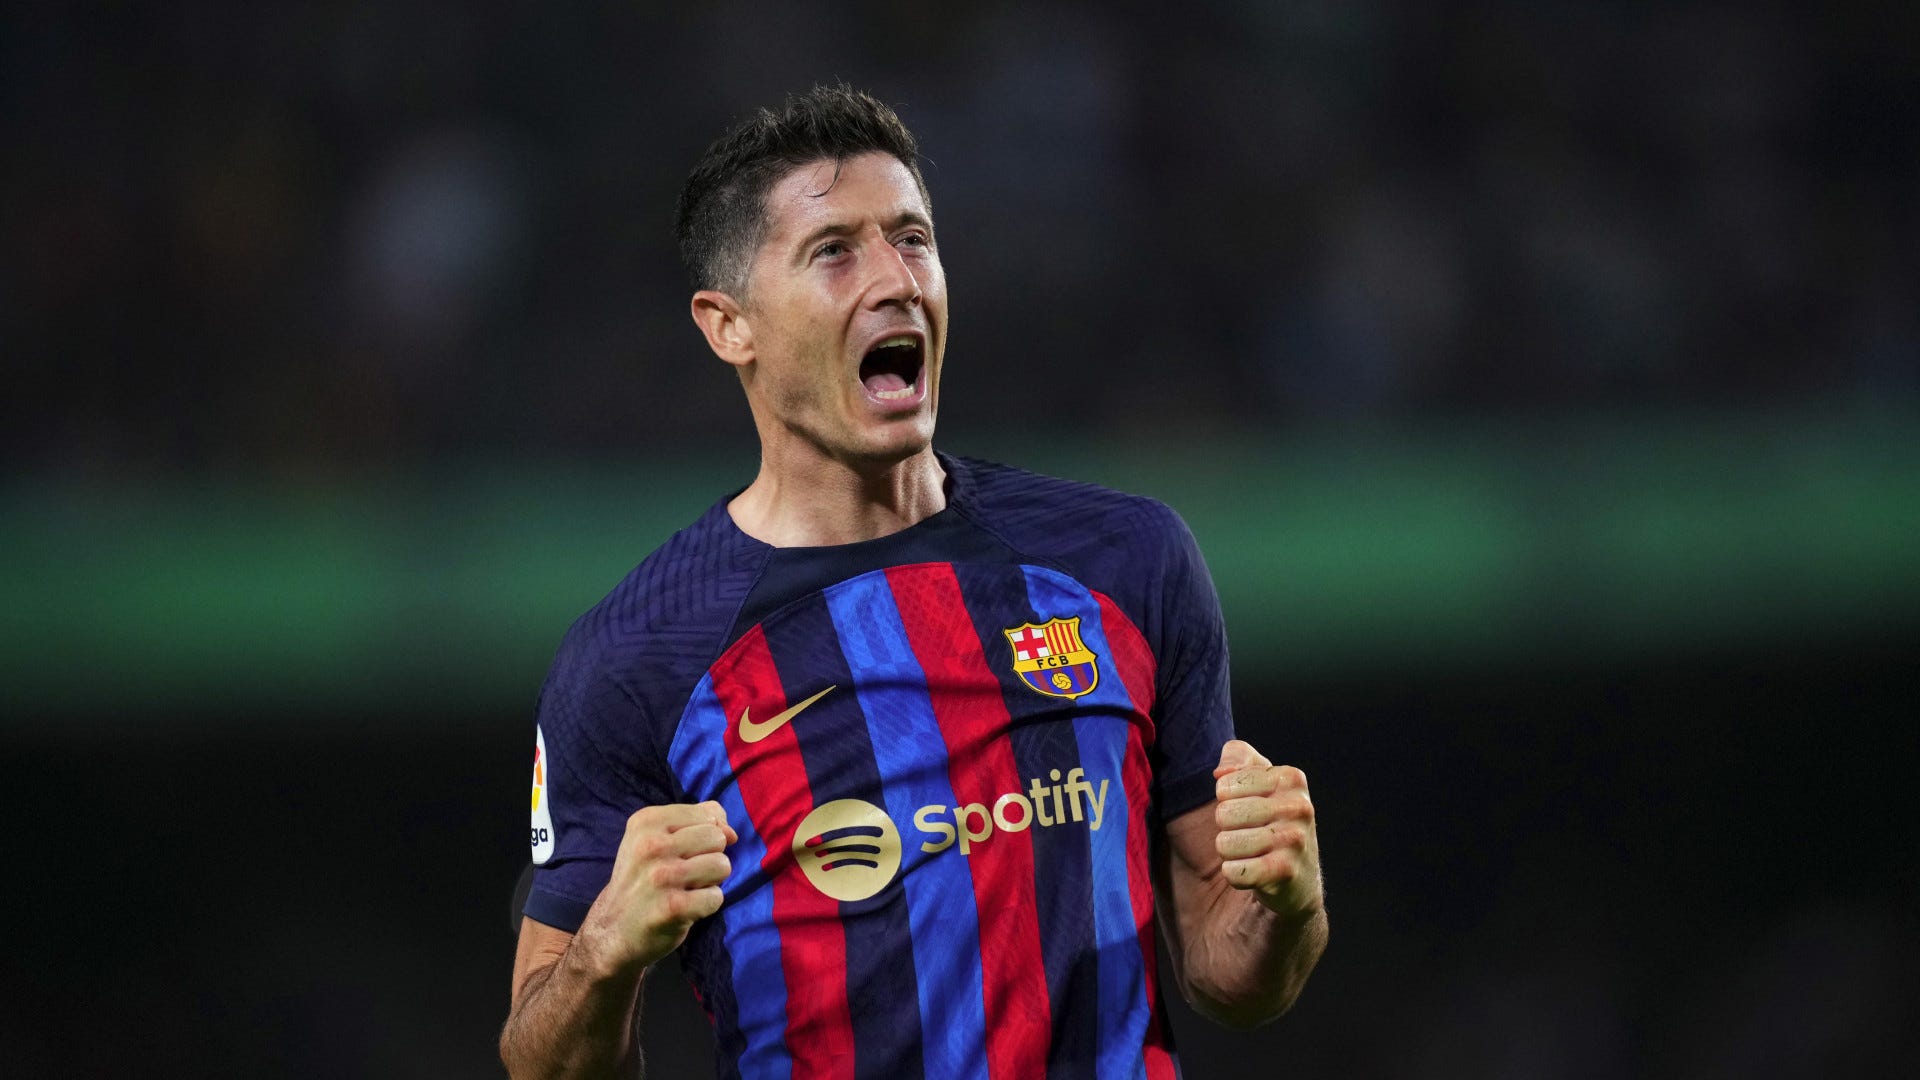 Barcelona vs Espanyol Live stream, TV channel, kick-off time and where to watch Goal UK